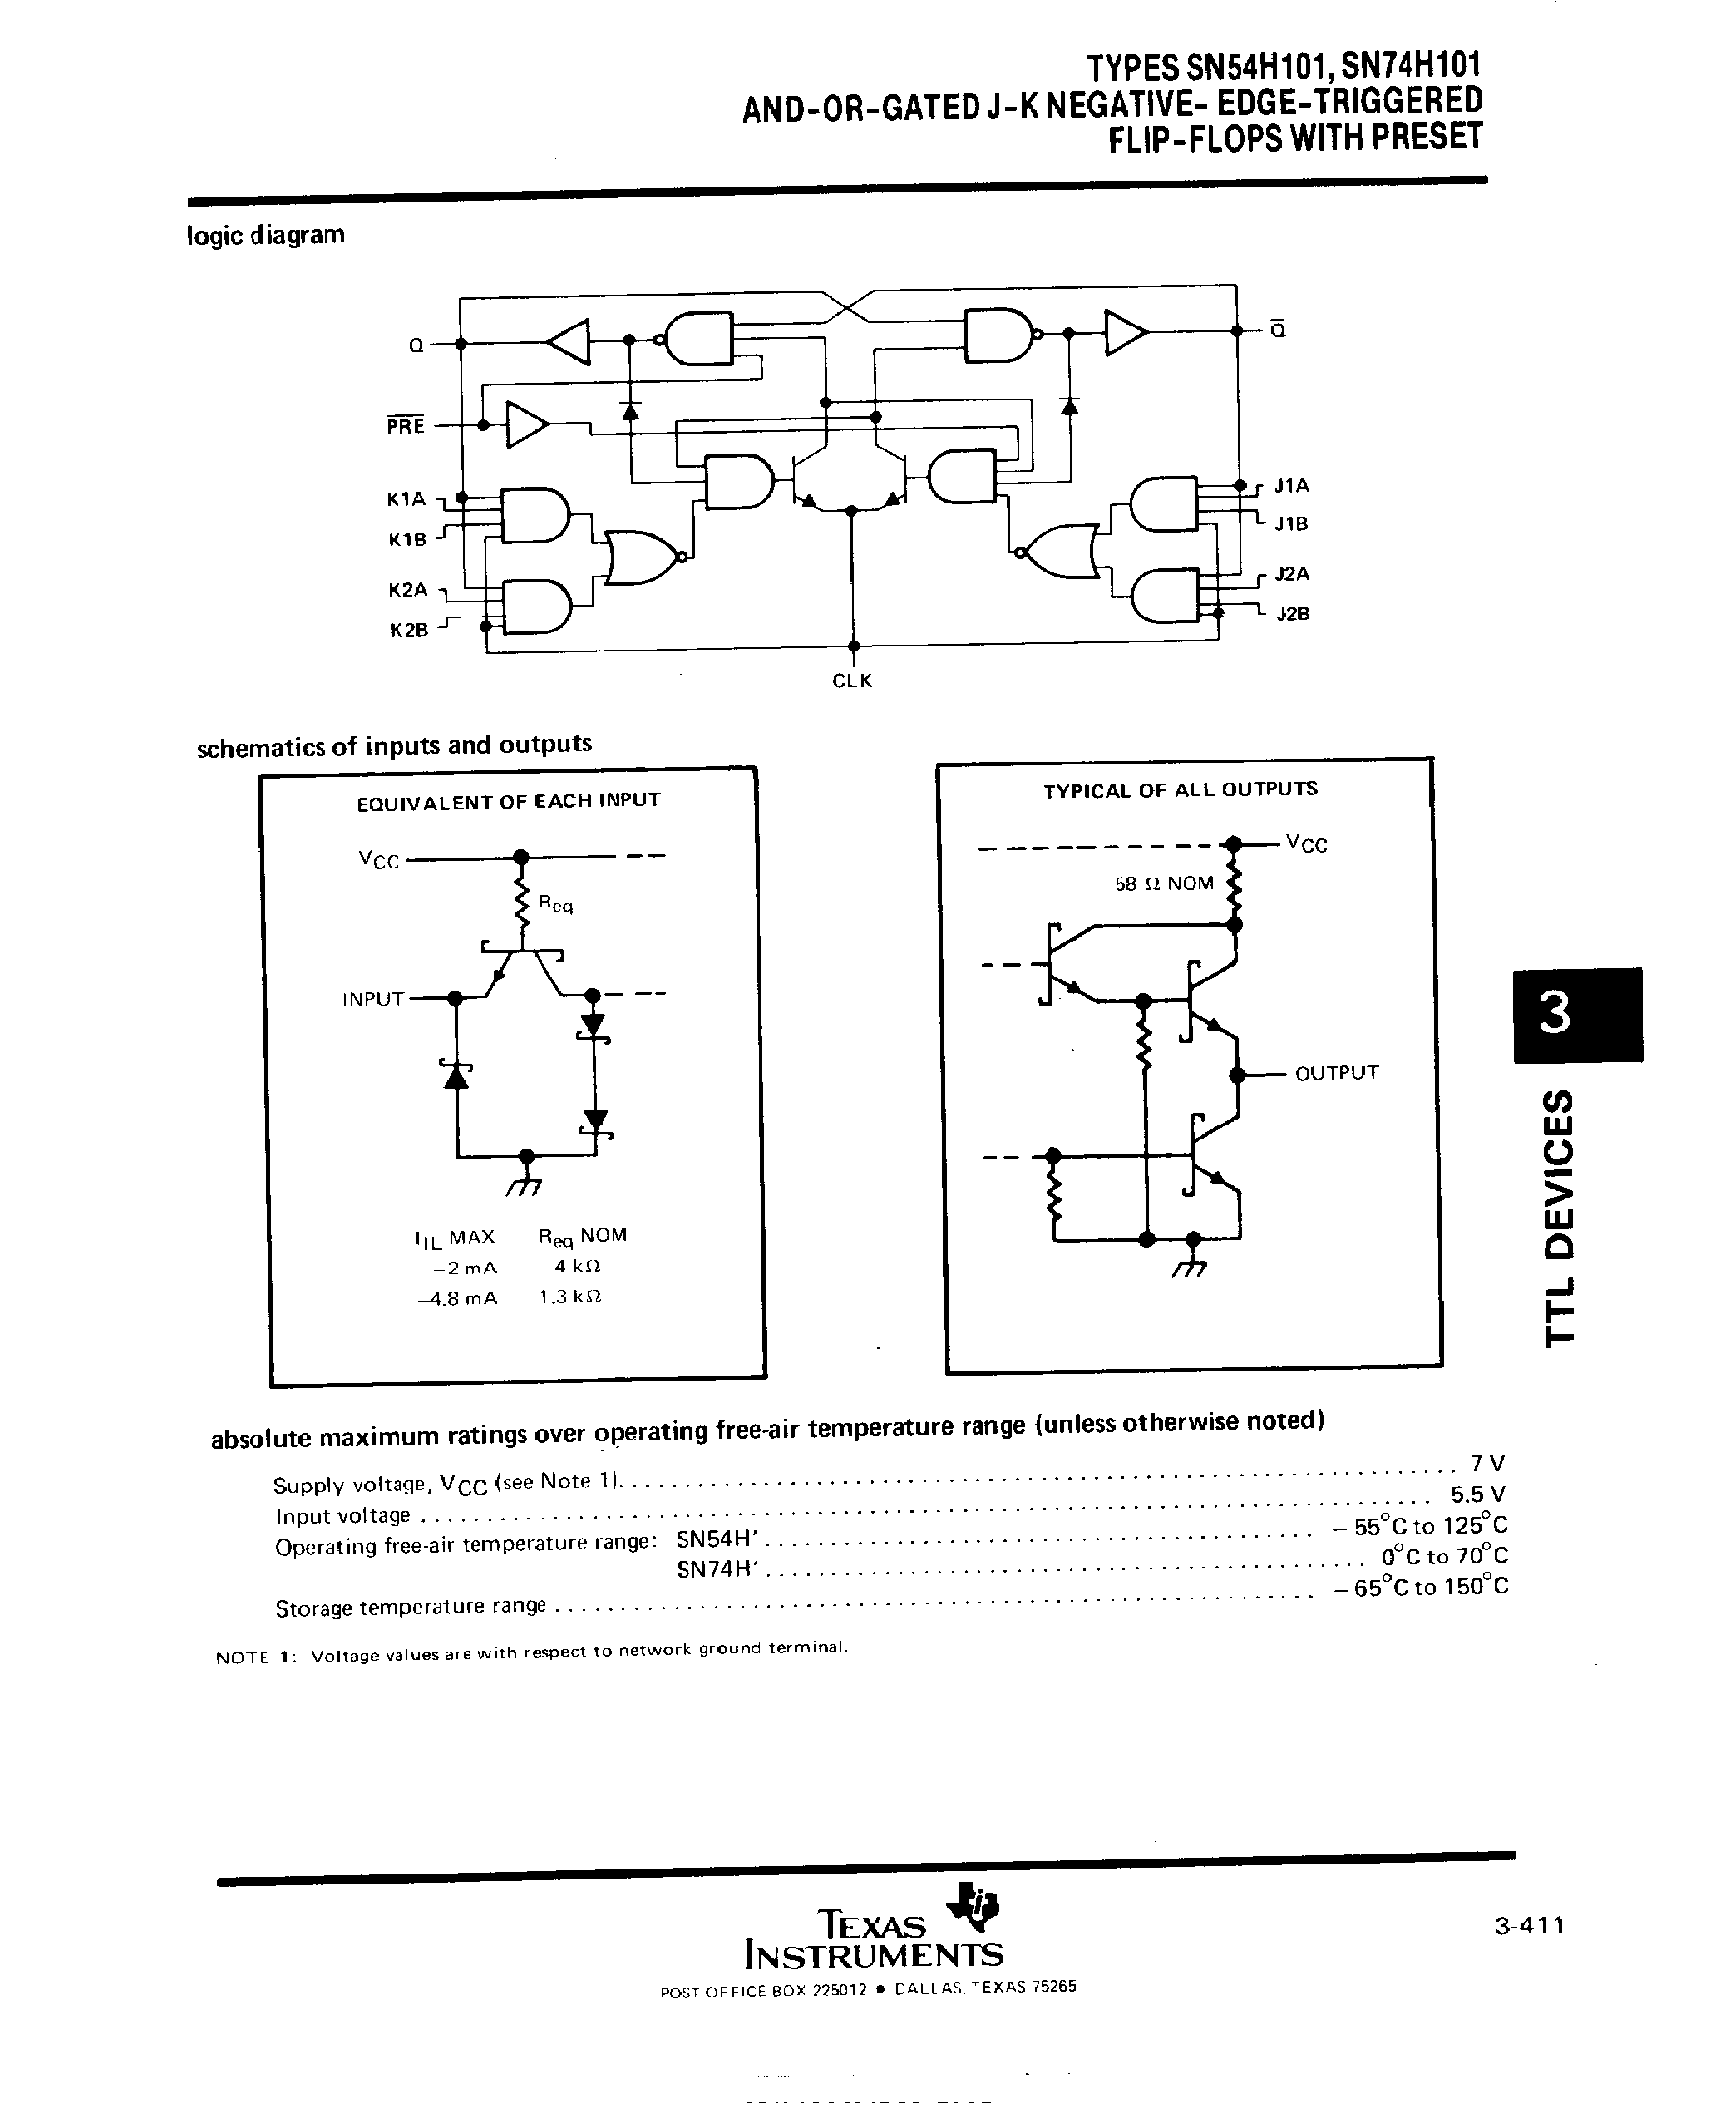 Datasheet SN74H101 - AND-OR Gated J-K Negative EDGE Triggered F-F with Preset page 2